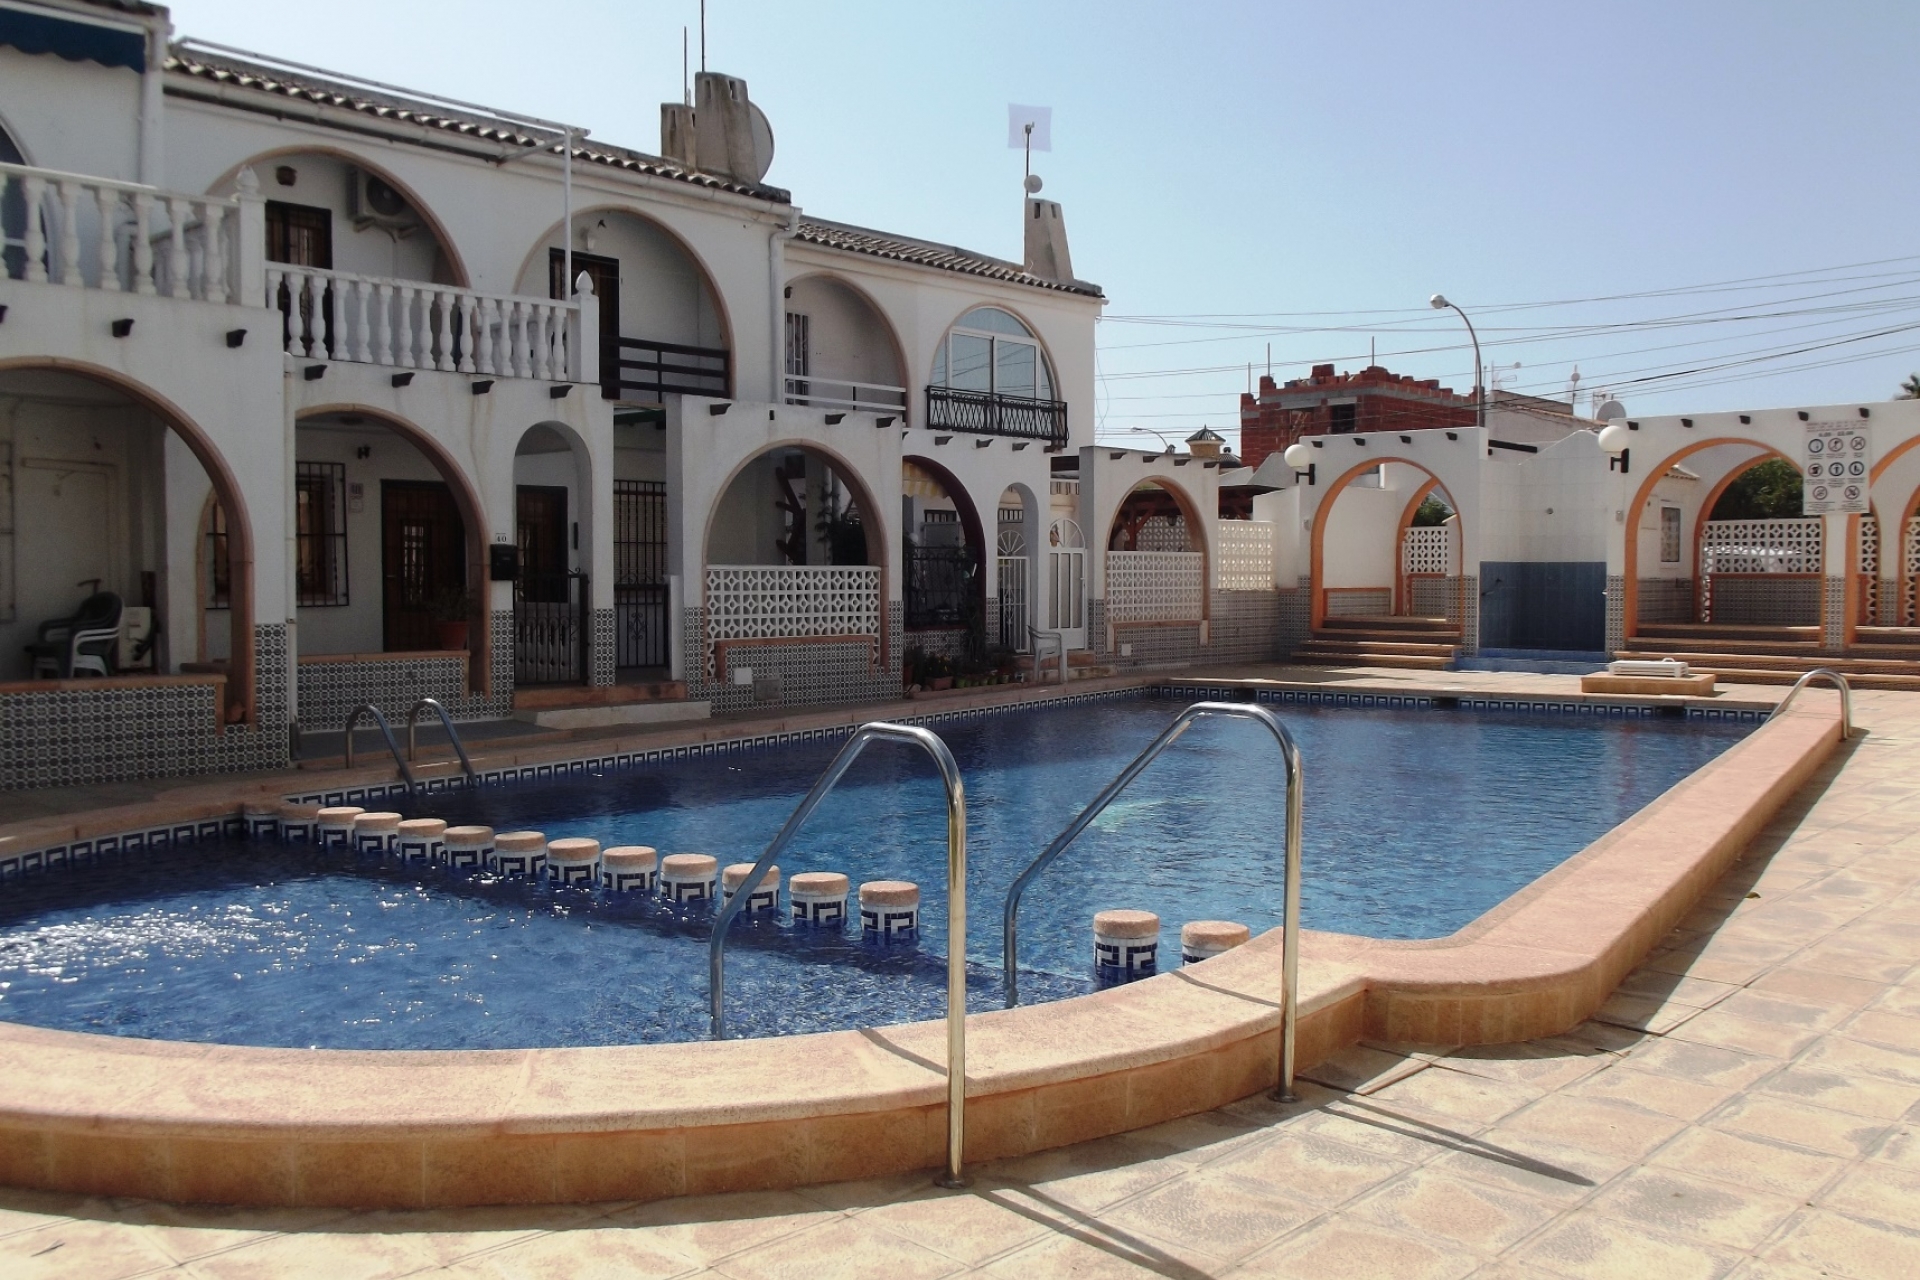 Archived - Townhouse for sale - Torrevieja - El Chaparral